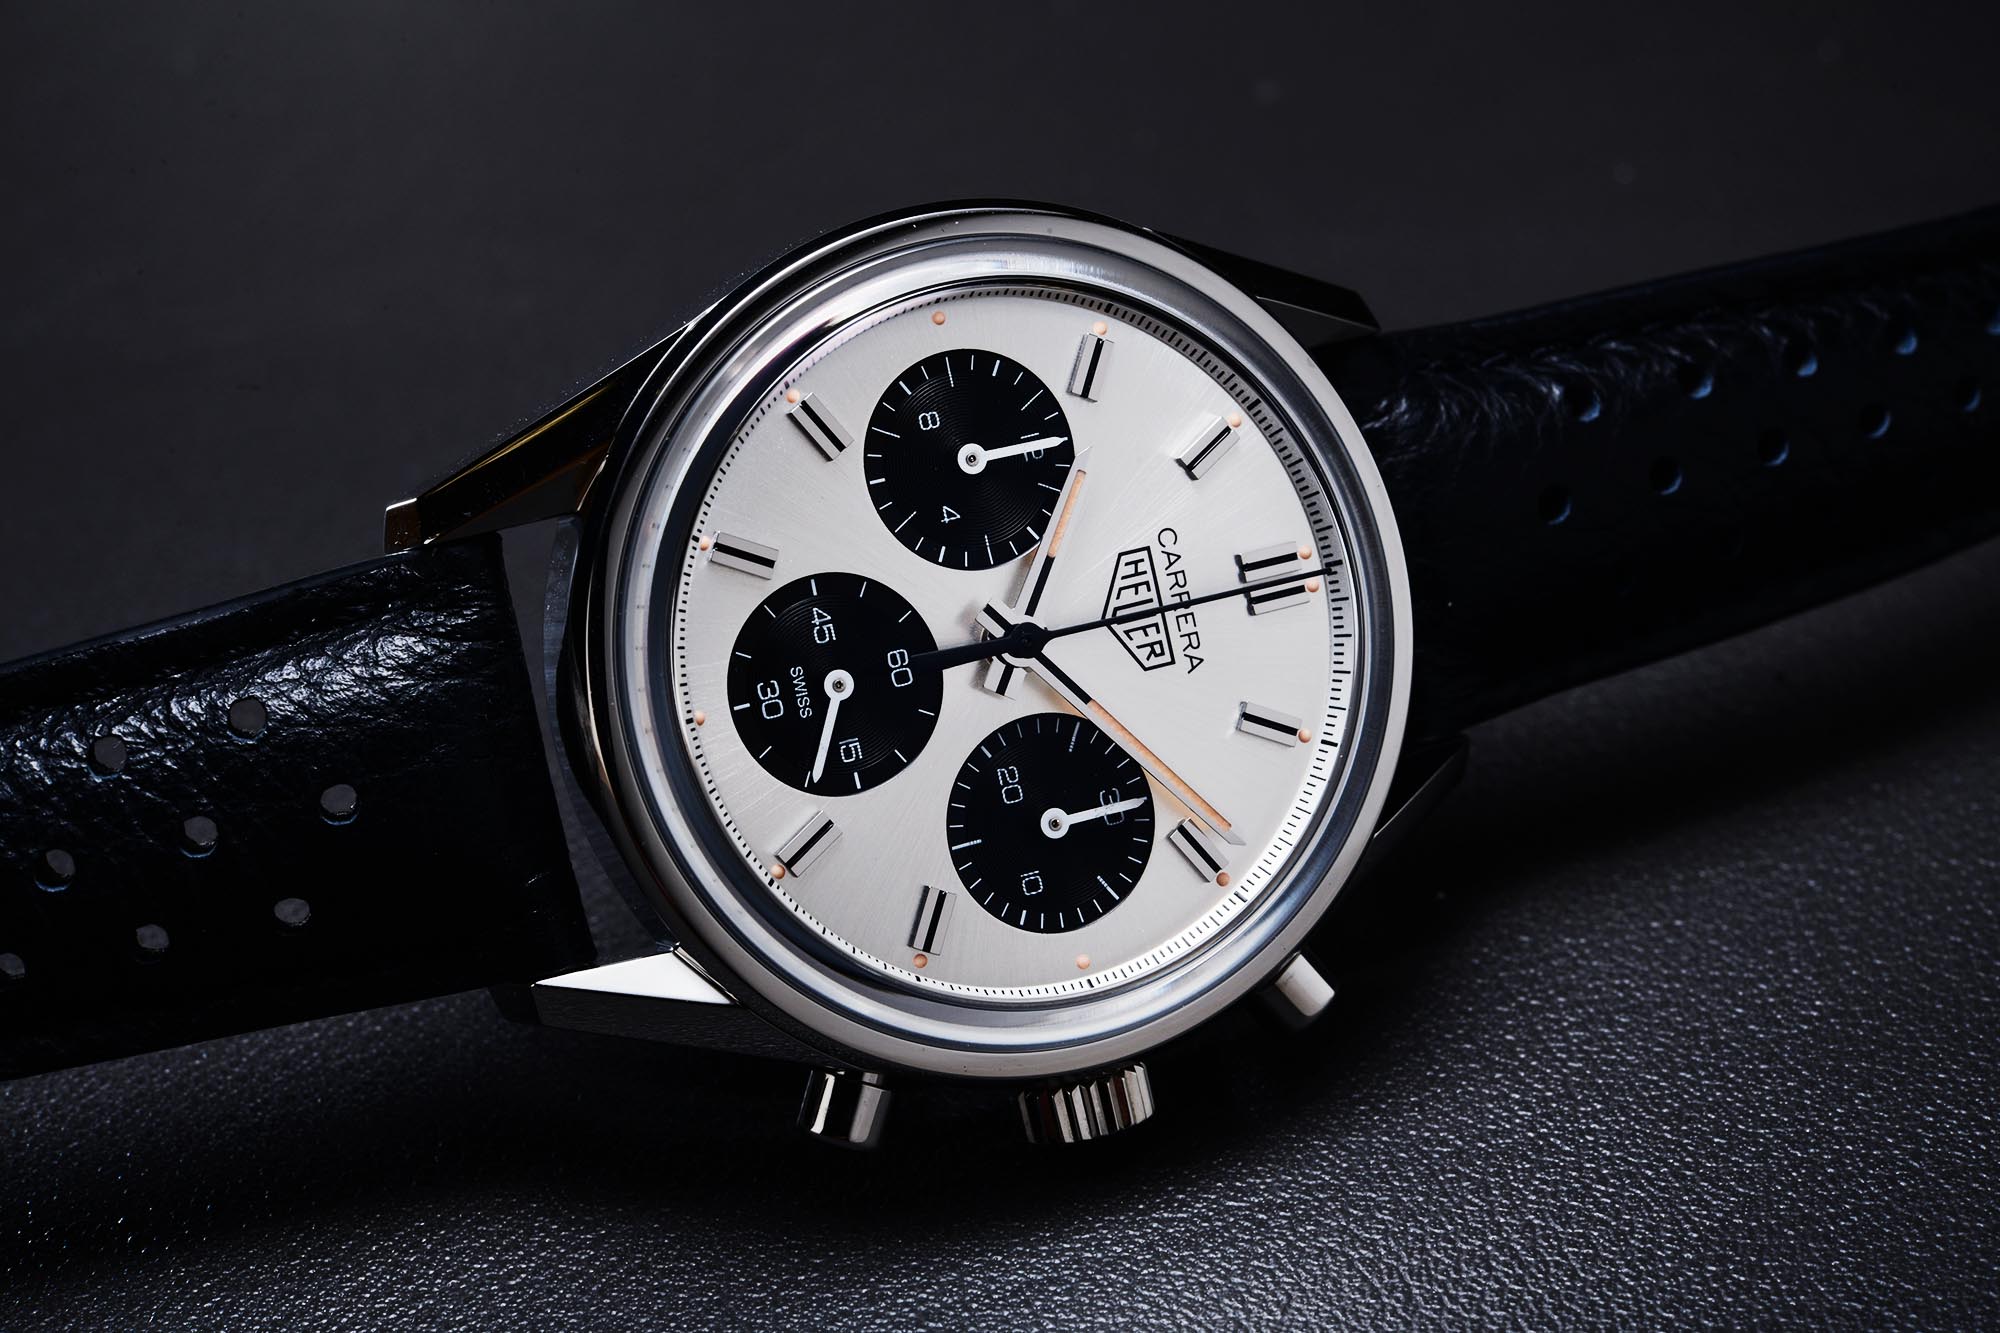 TAG Heuer Carrera Celebrates 60 Years With New Watches Under $6,500 -  ATimelyPerspective